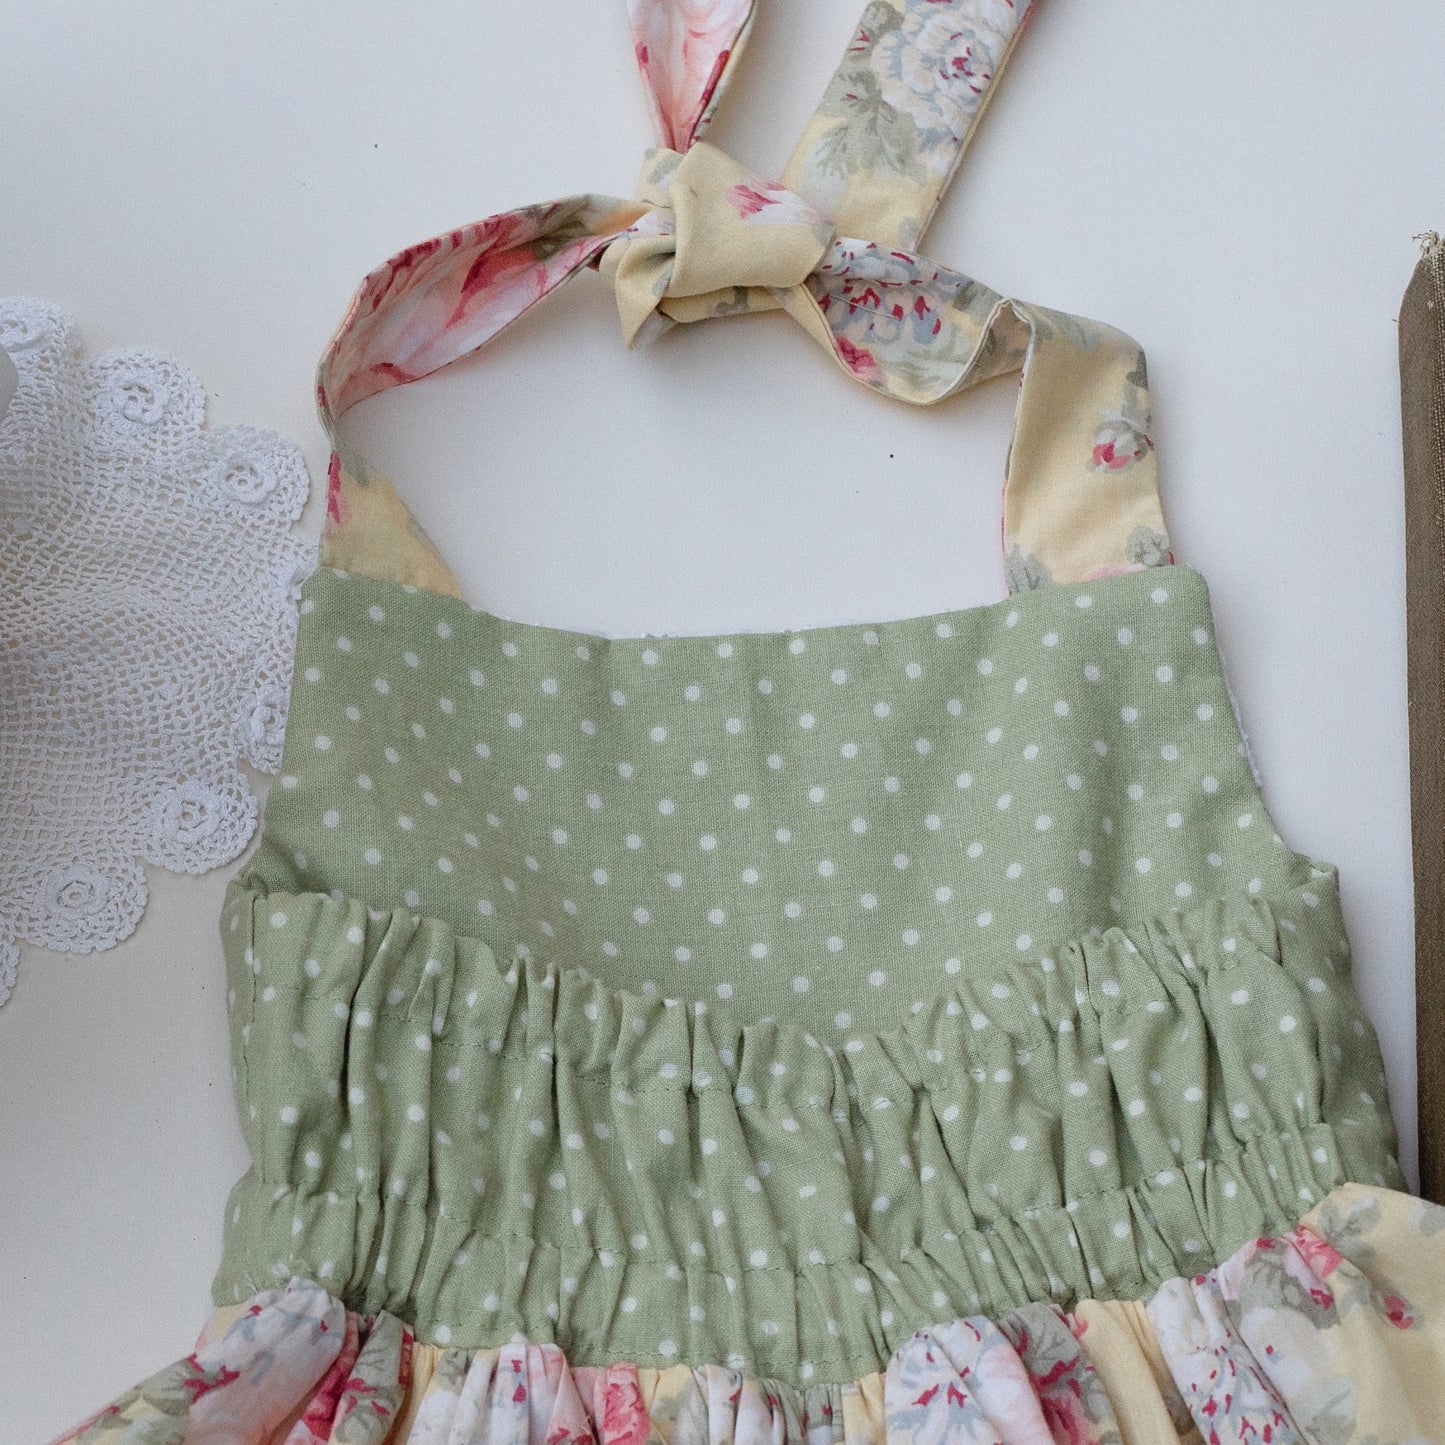 SALE - Girls size 4 floral yellow and green summer dress with vintage lace, sleeveless elastic back, pockets, vintage style. Free Shipping.